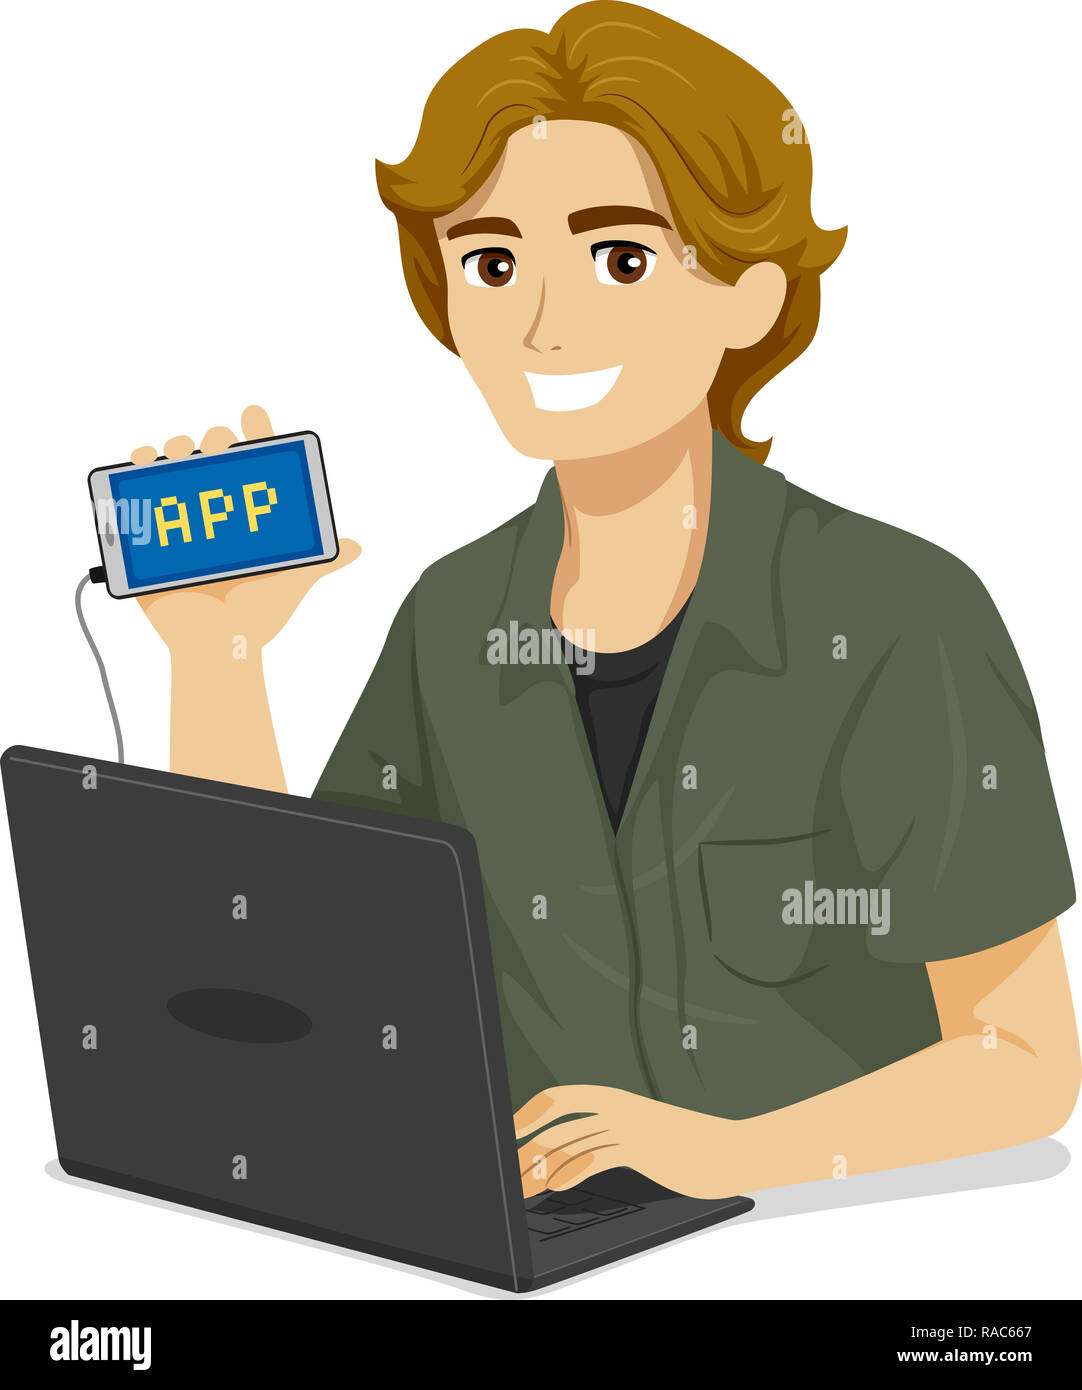 Illustration of a Teenage Guy Showing His Mobile App He Programmed on His Laptop Stock Photo